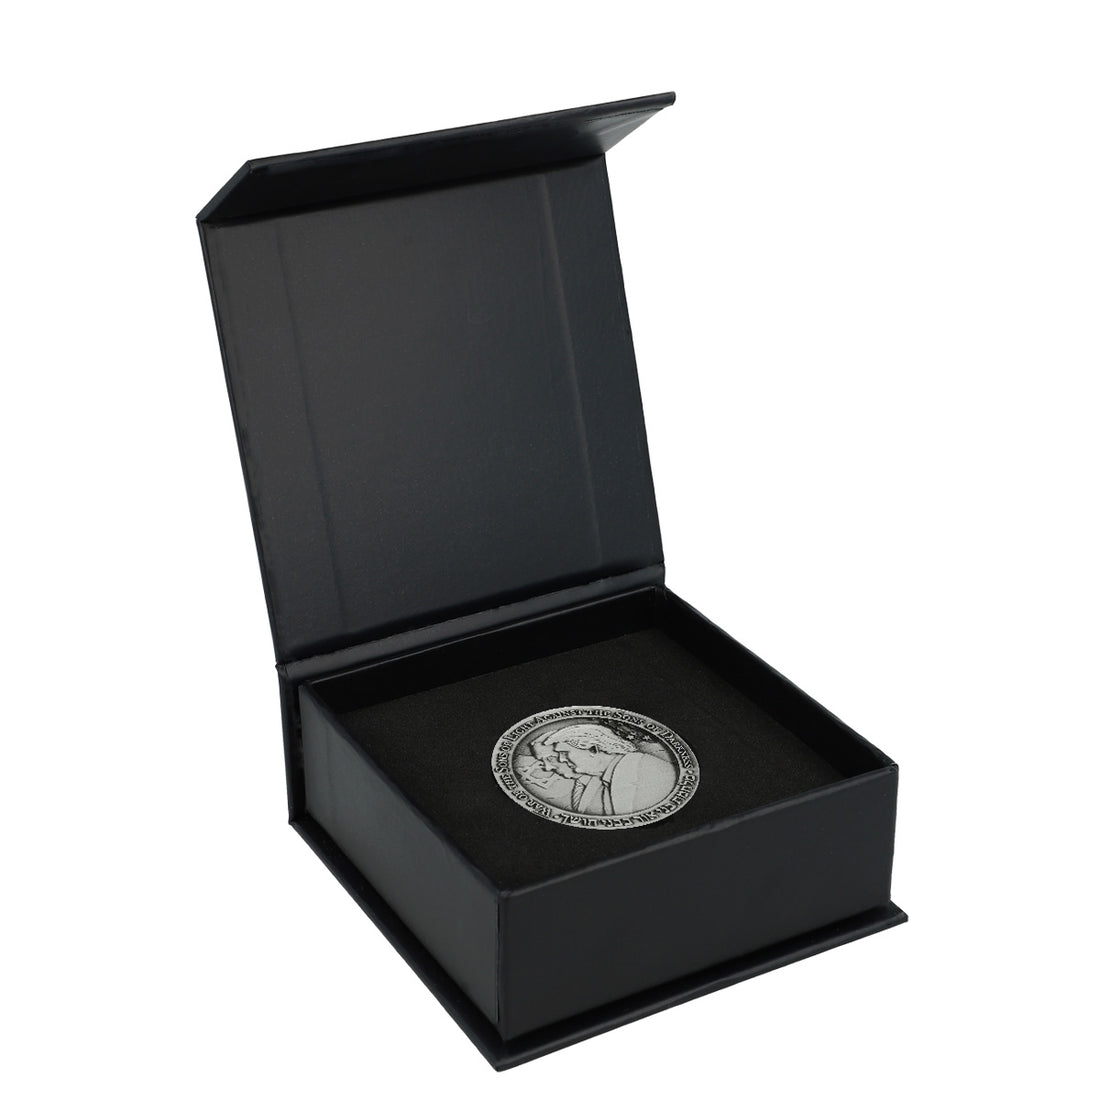 Sons of Light Against Sons of Darkness coin with box (5409590050966)